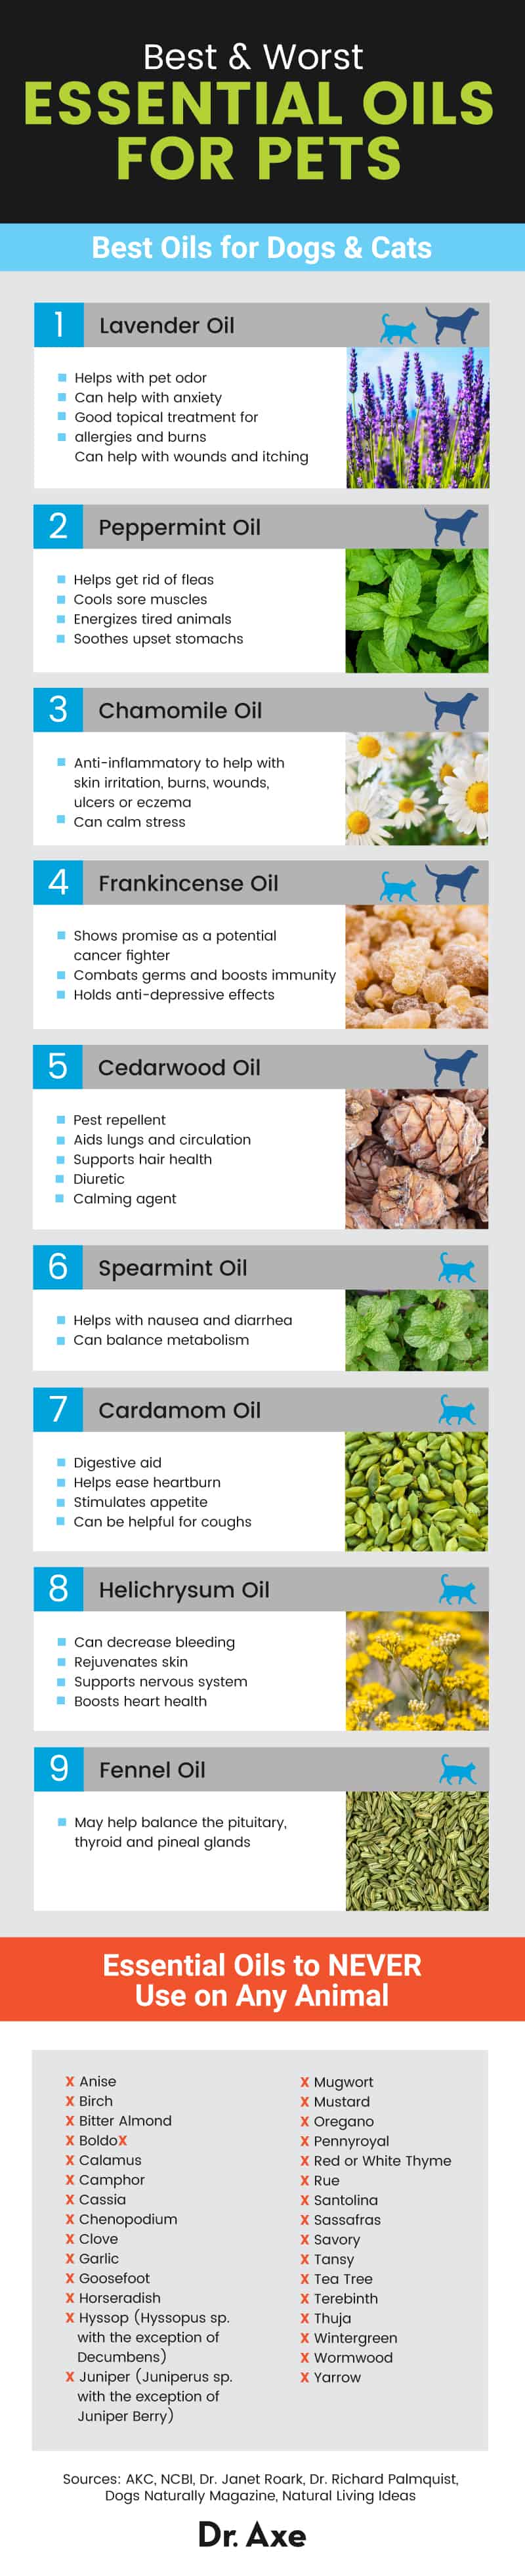 Essential oils for pets - Dr. Axe